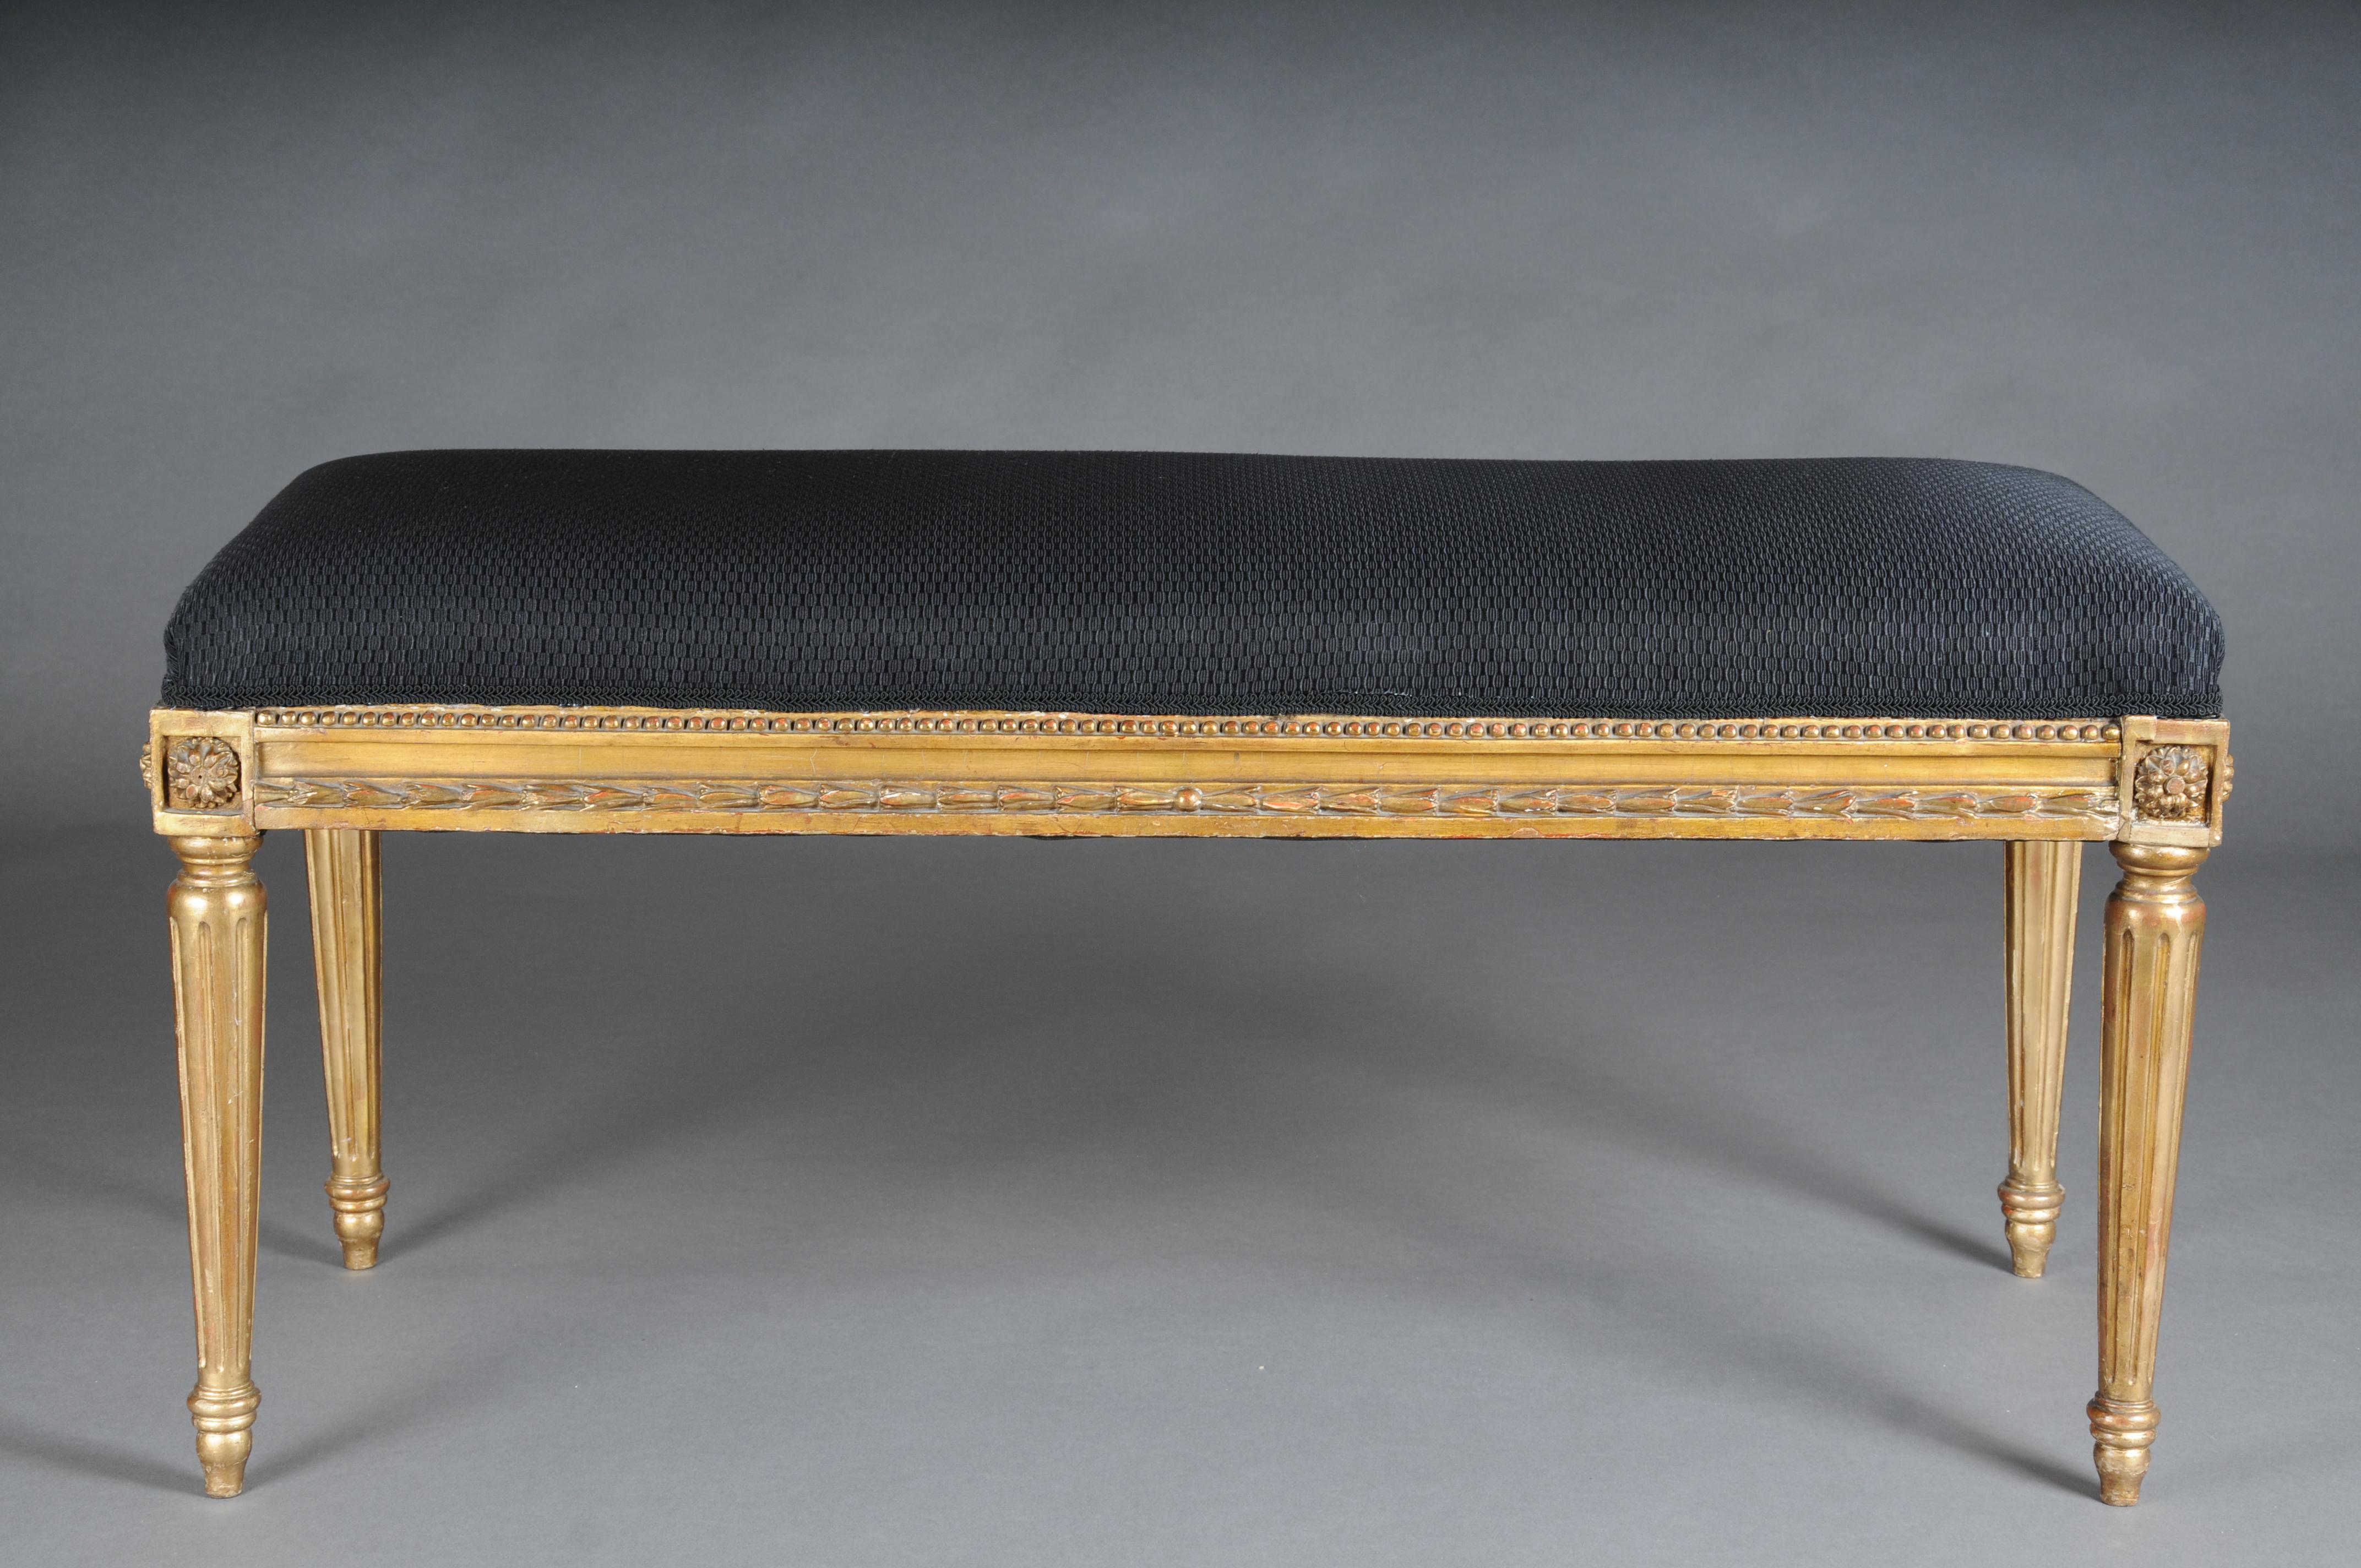 Magnificent antique bench, Louis XVI, gold, beech, around 1870

Impressive and rare bench, France around 1870.
Louis XVI made of solid beech wood, hand-carved and gilded. The seat cover was freshly upholstered and covered a few months ago by a